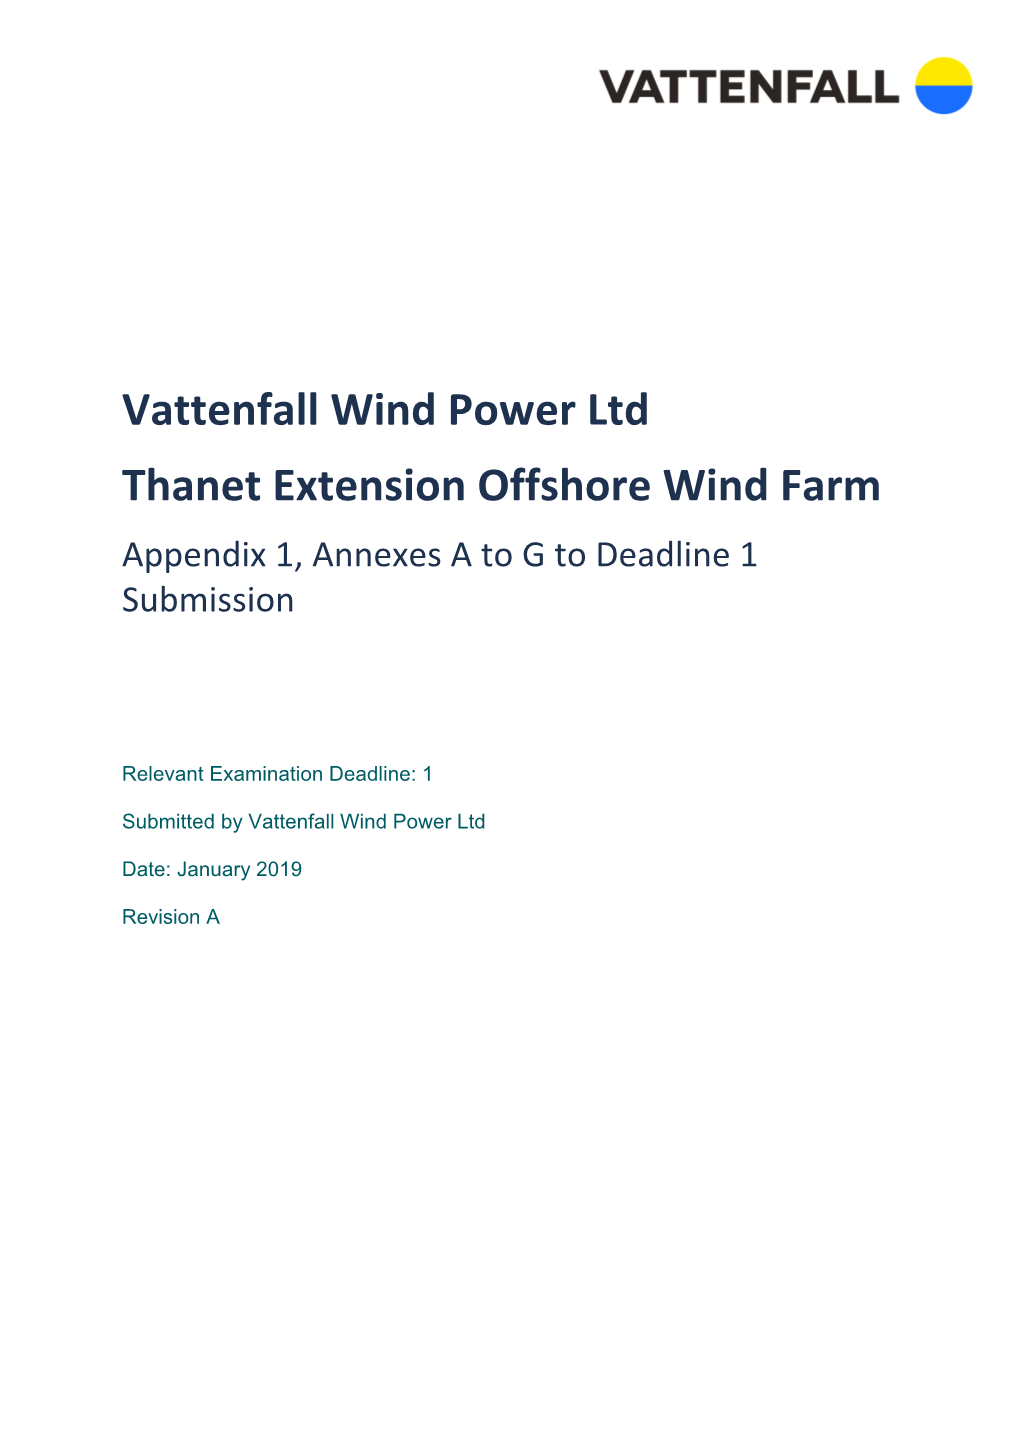 Vattenfall Wind Power Ltd Thanet Extension Offshore Wind Farm Appendix 1, Annexes a to G to Deadline 1 Submission